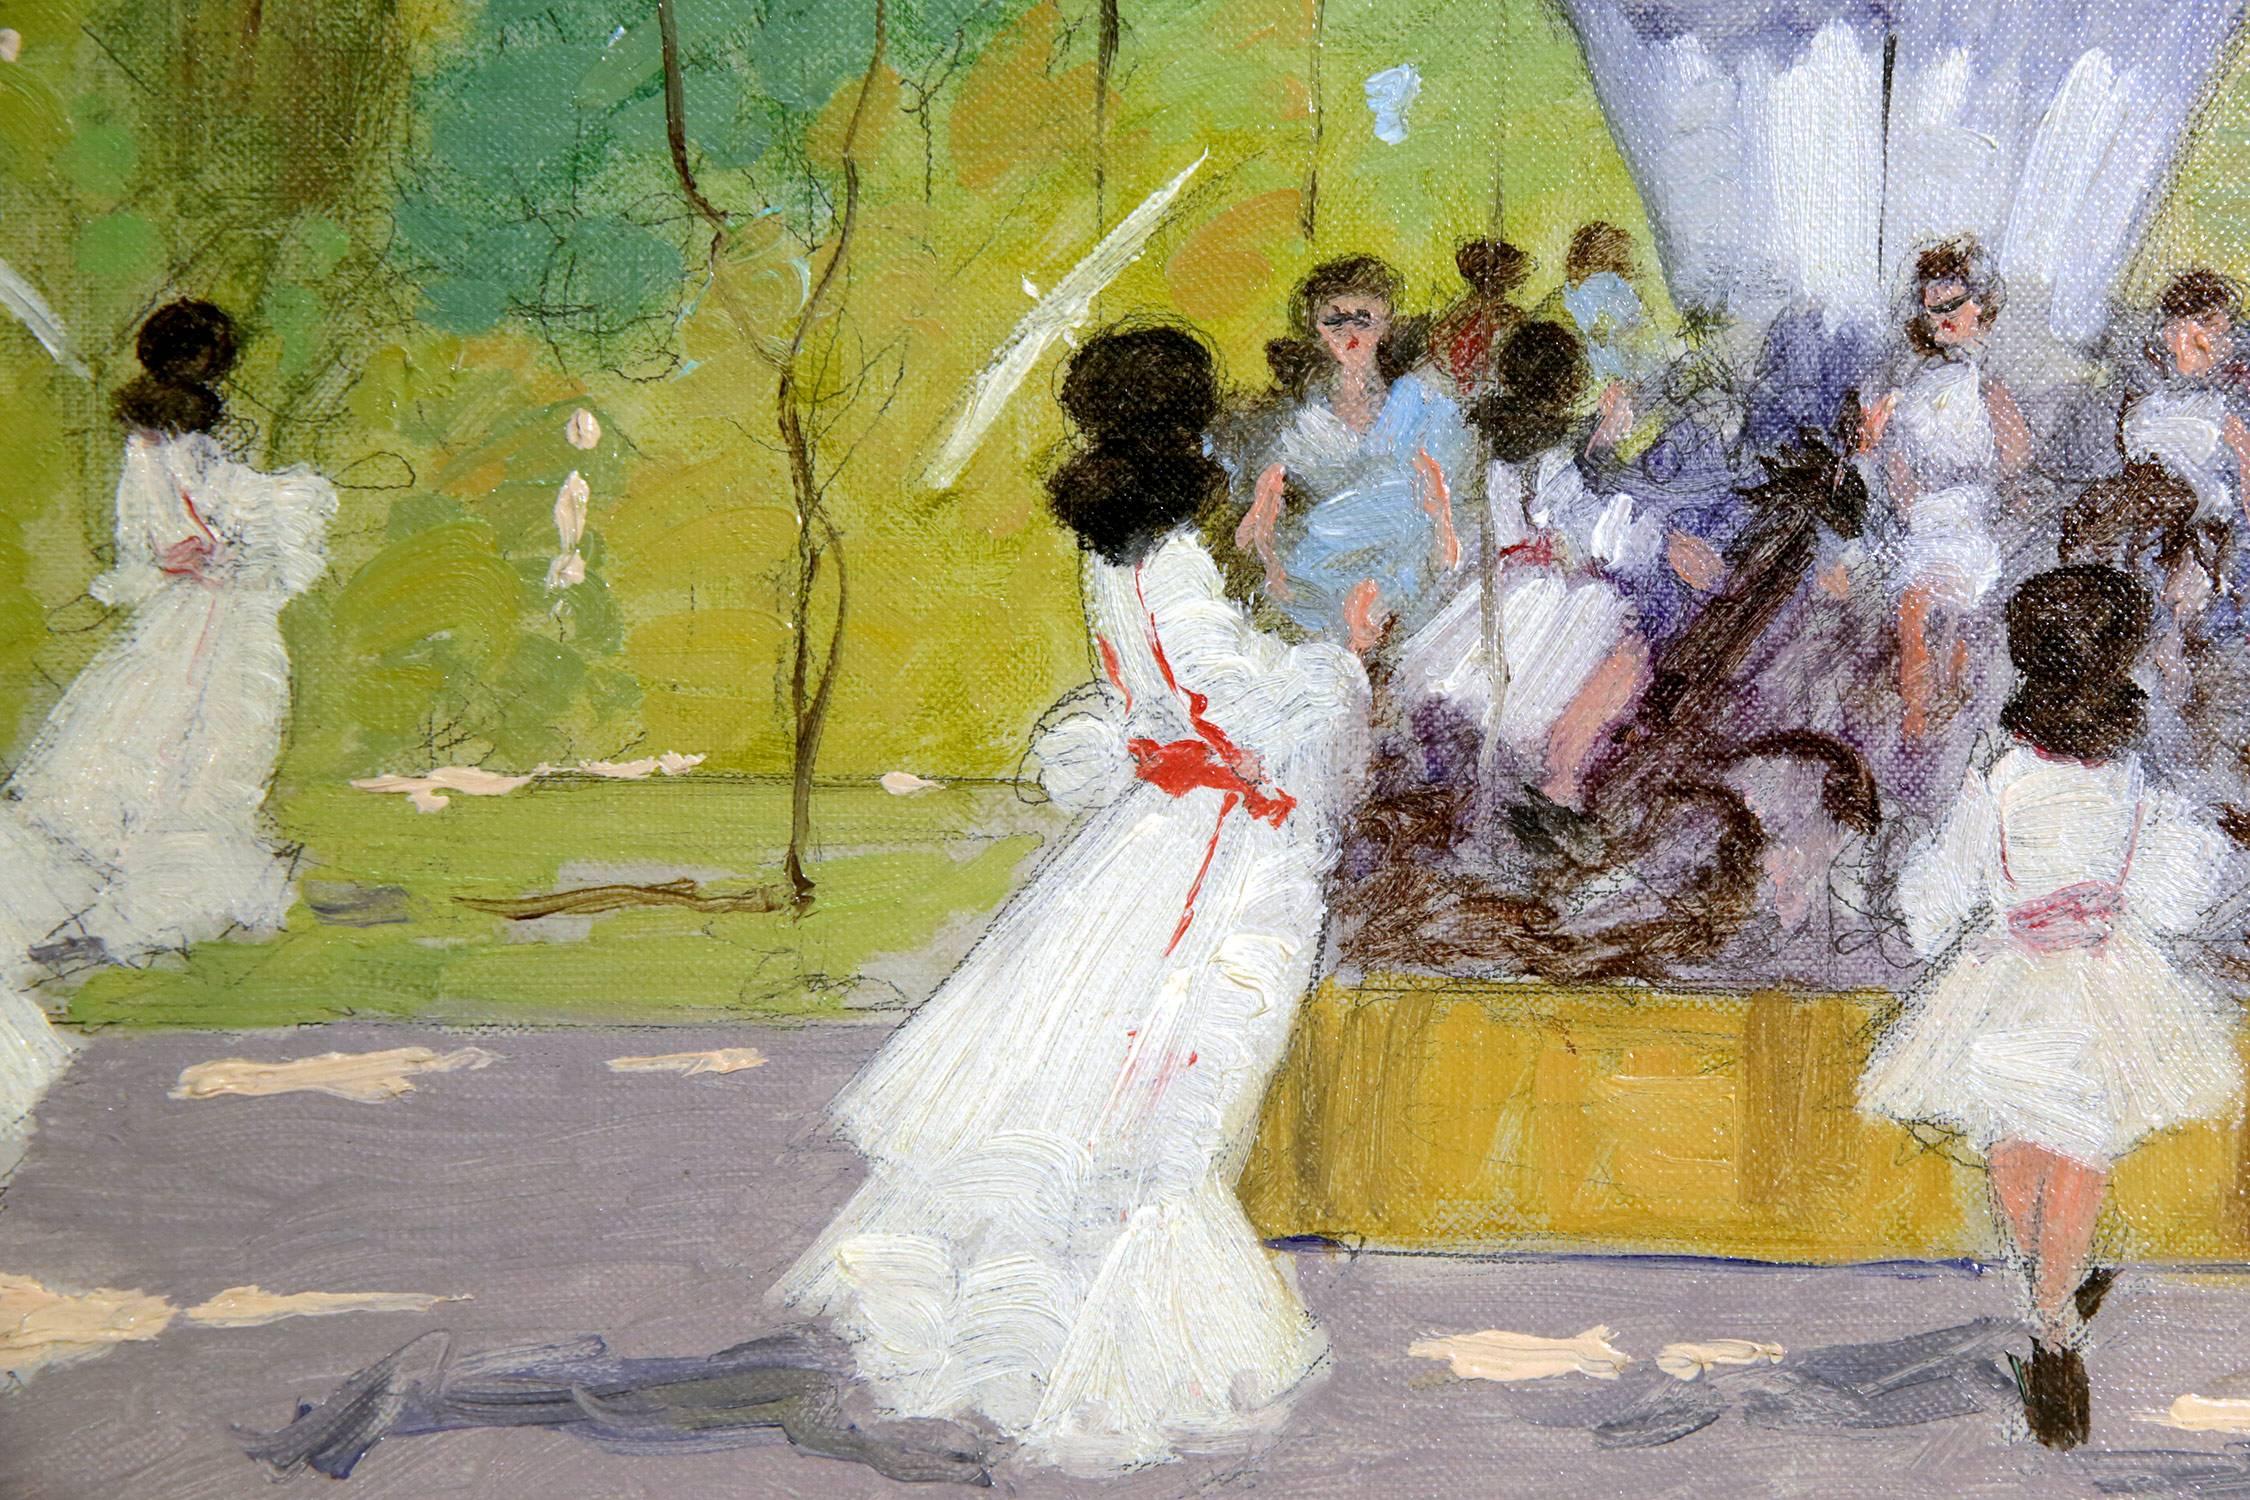 Parisian Carnival with Children in a Carousel  - Impressionist Painting by Luigi Cagliani